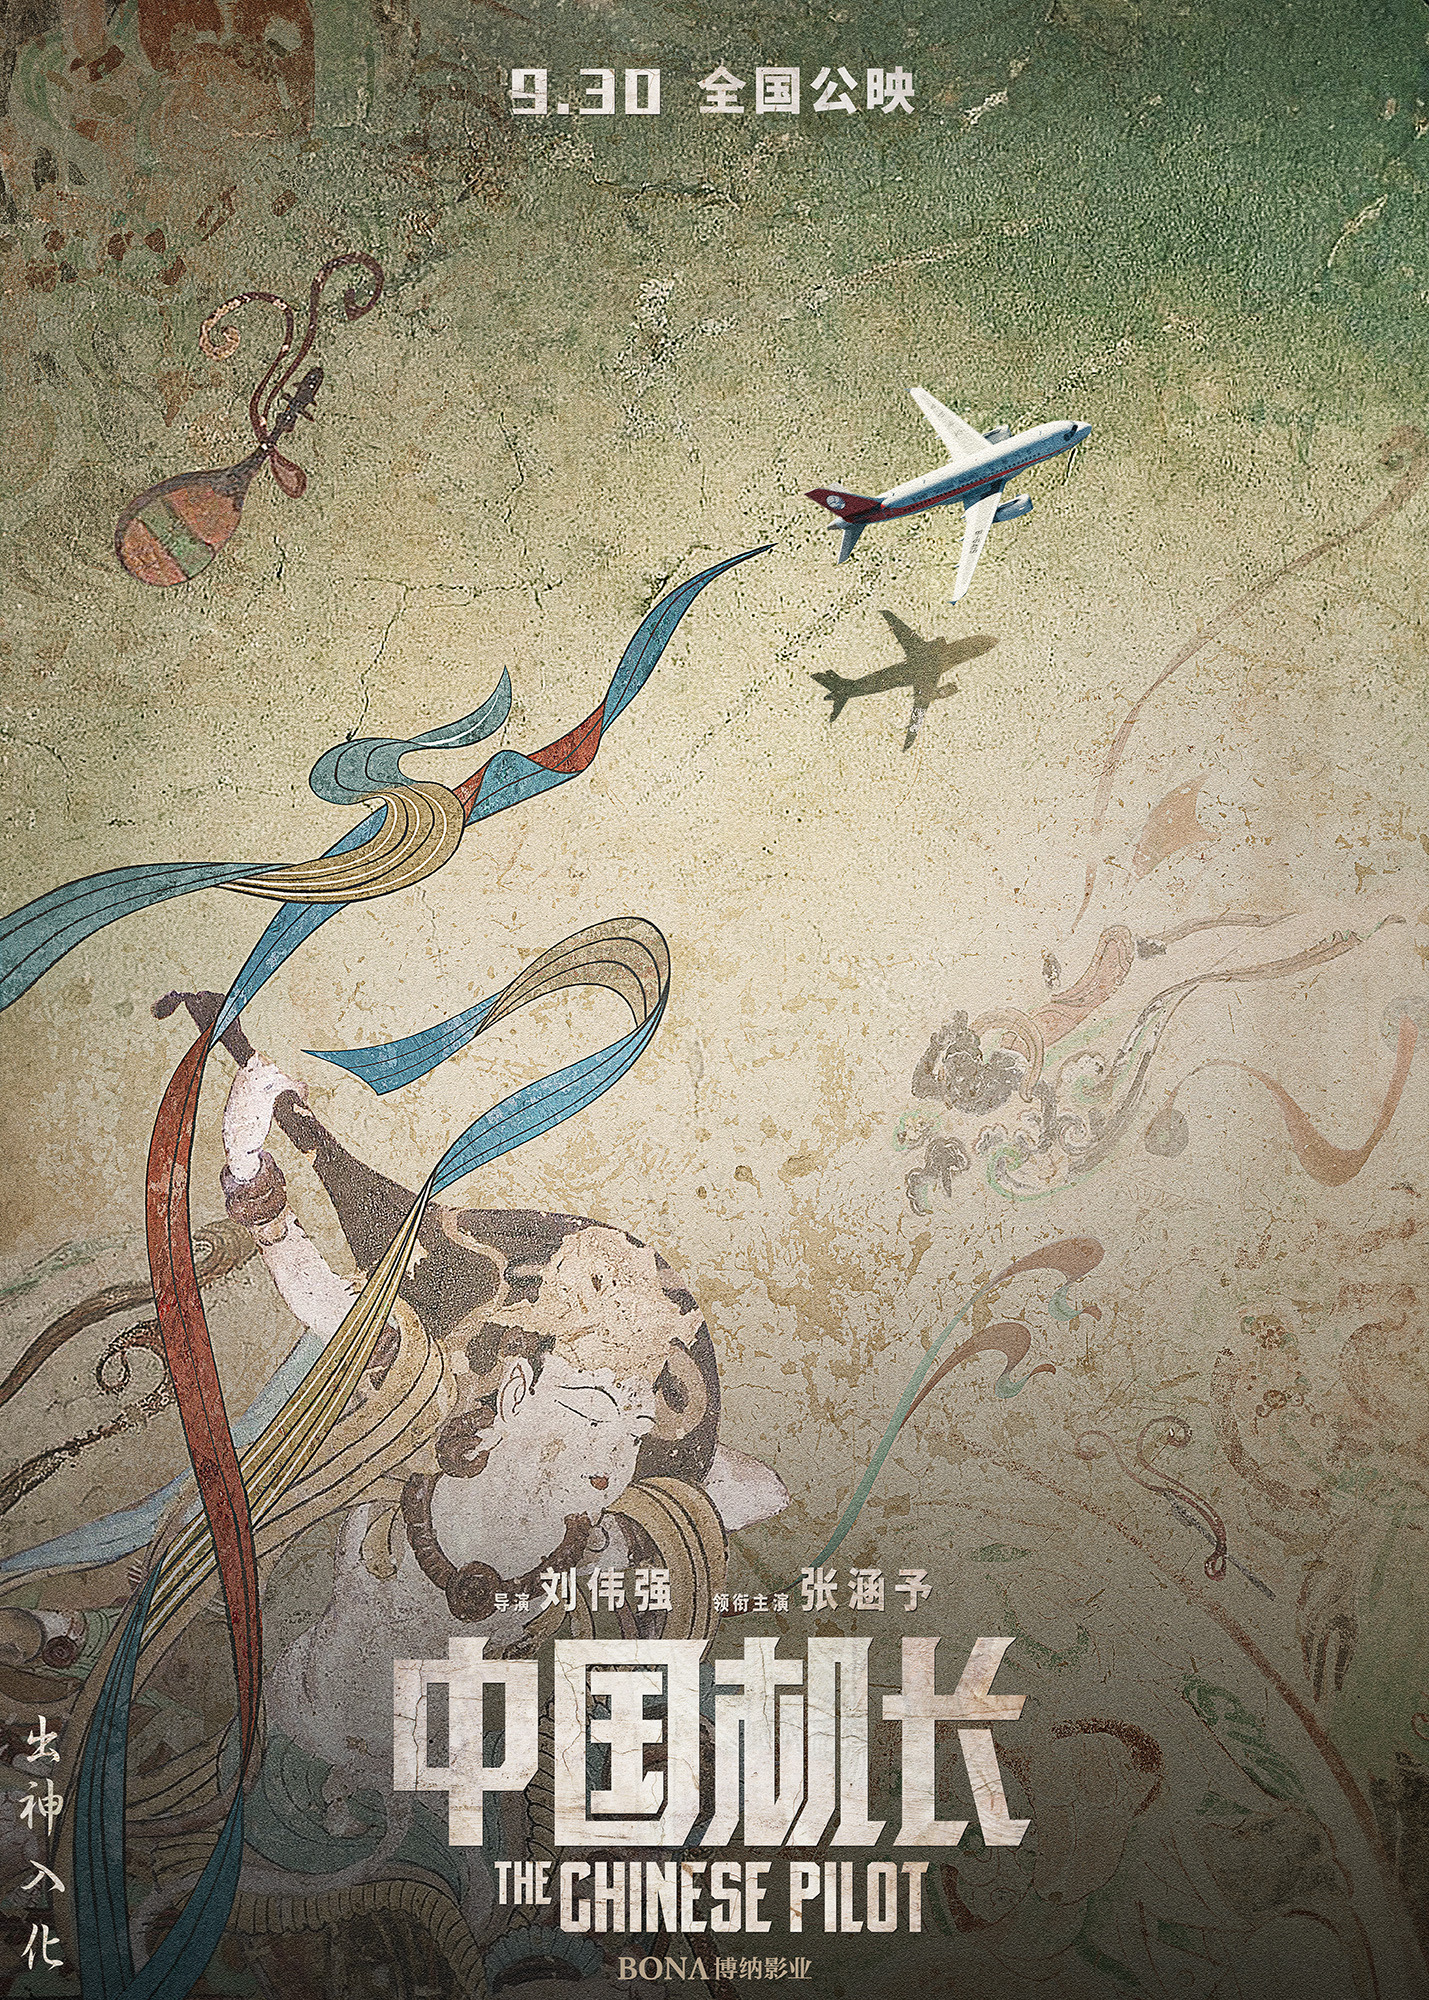 Mega Sized Movie Poster Image for The Chinese Pilot (#15 of 17)